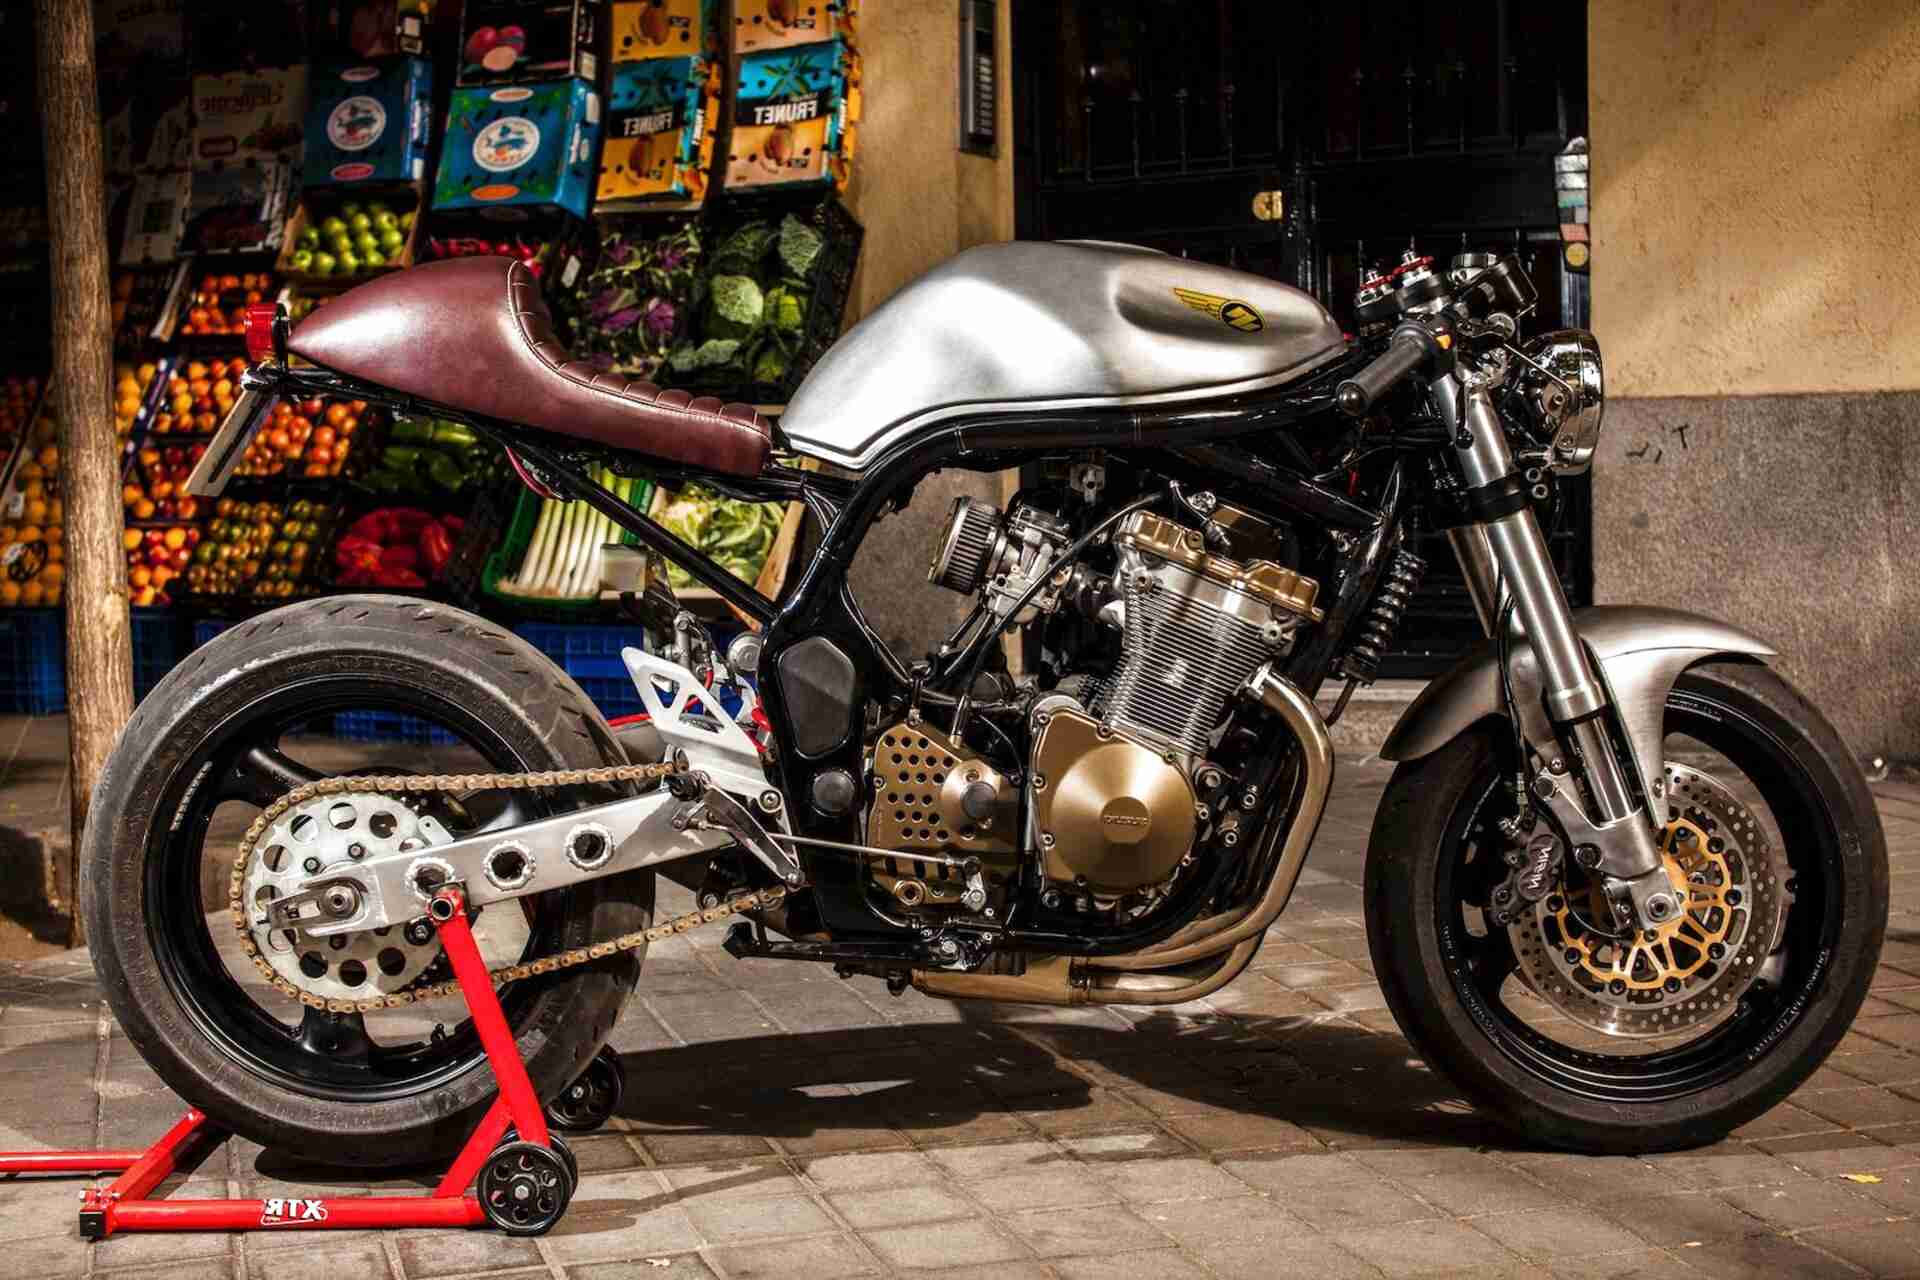 Suzuki Bandit Cafe Racer For Sale In Uk View 55 Ads